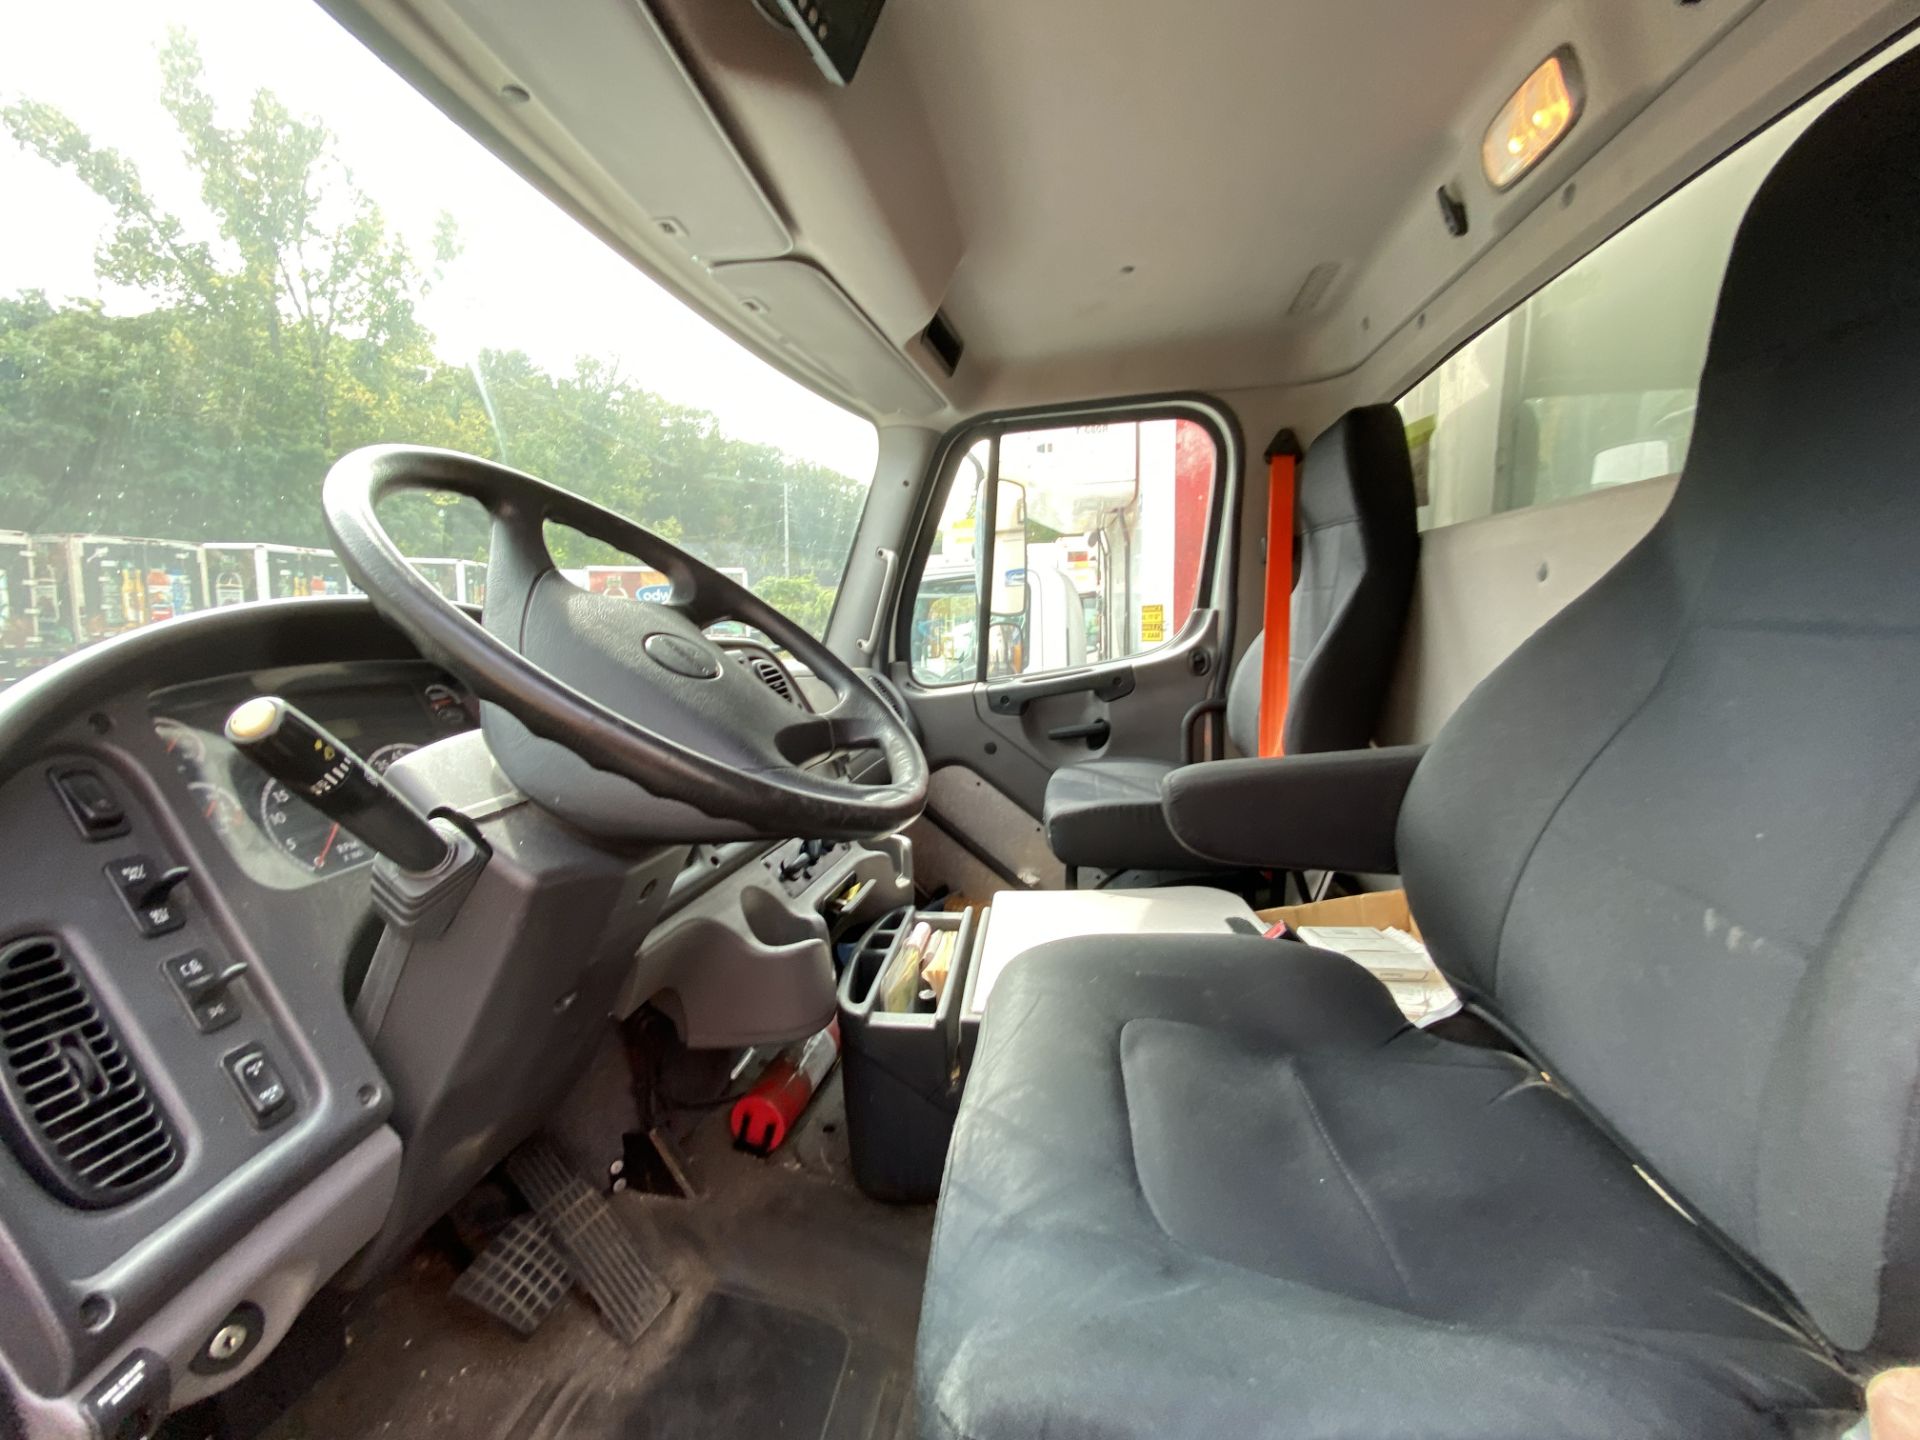 2015 Freightliner refrigerated truck - Image 6 of 8